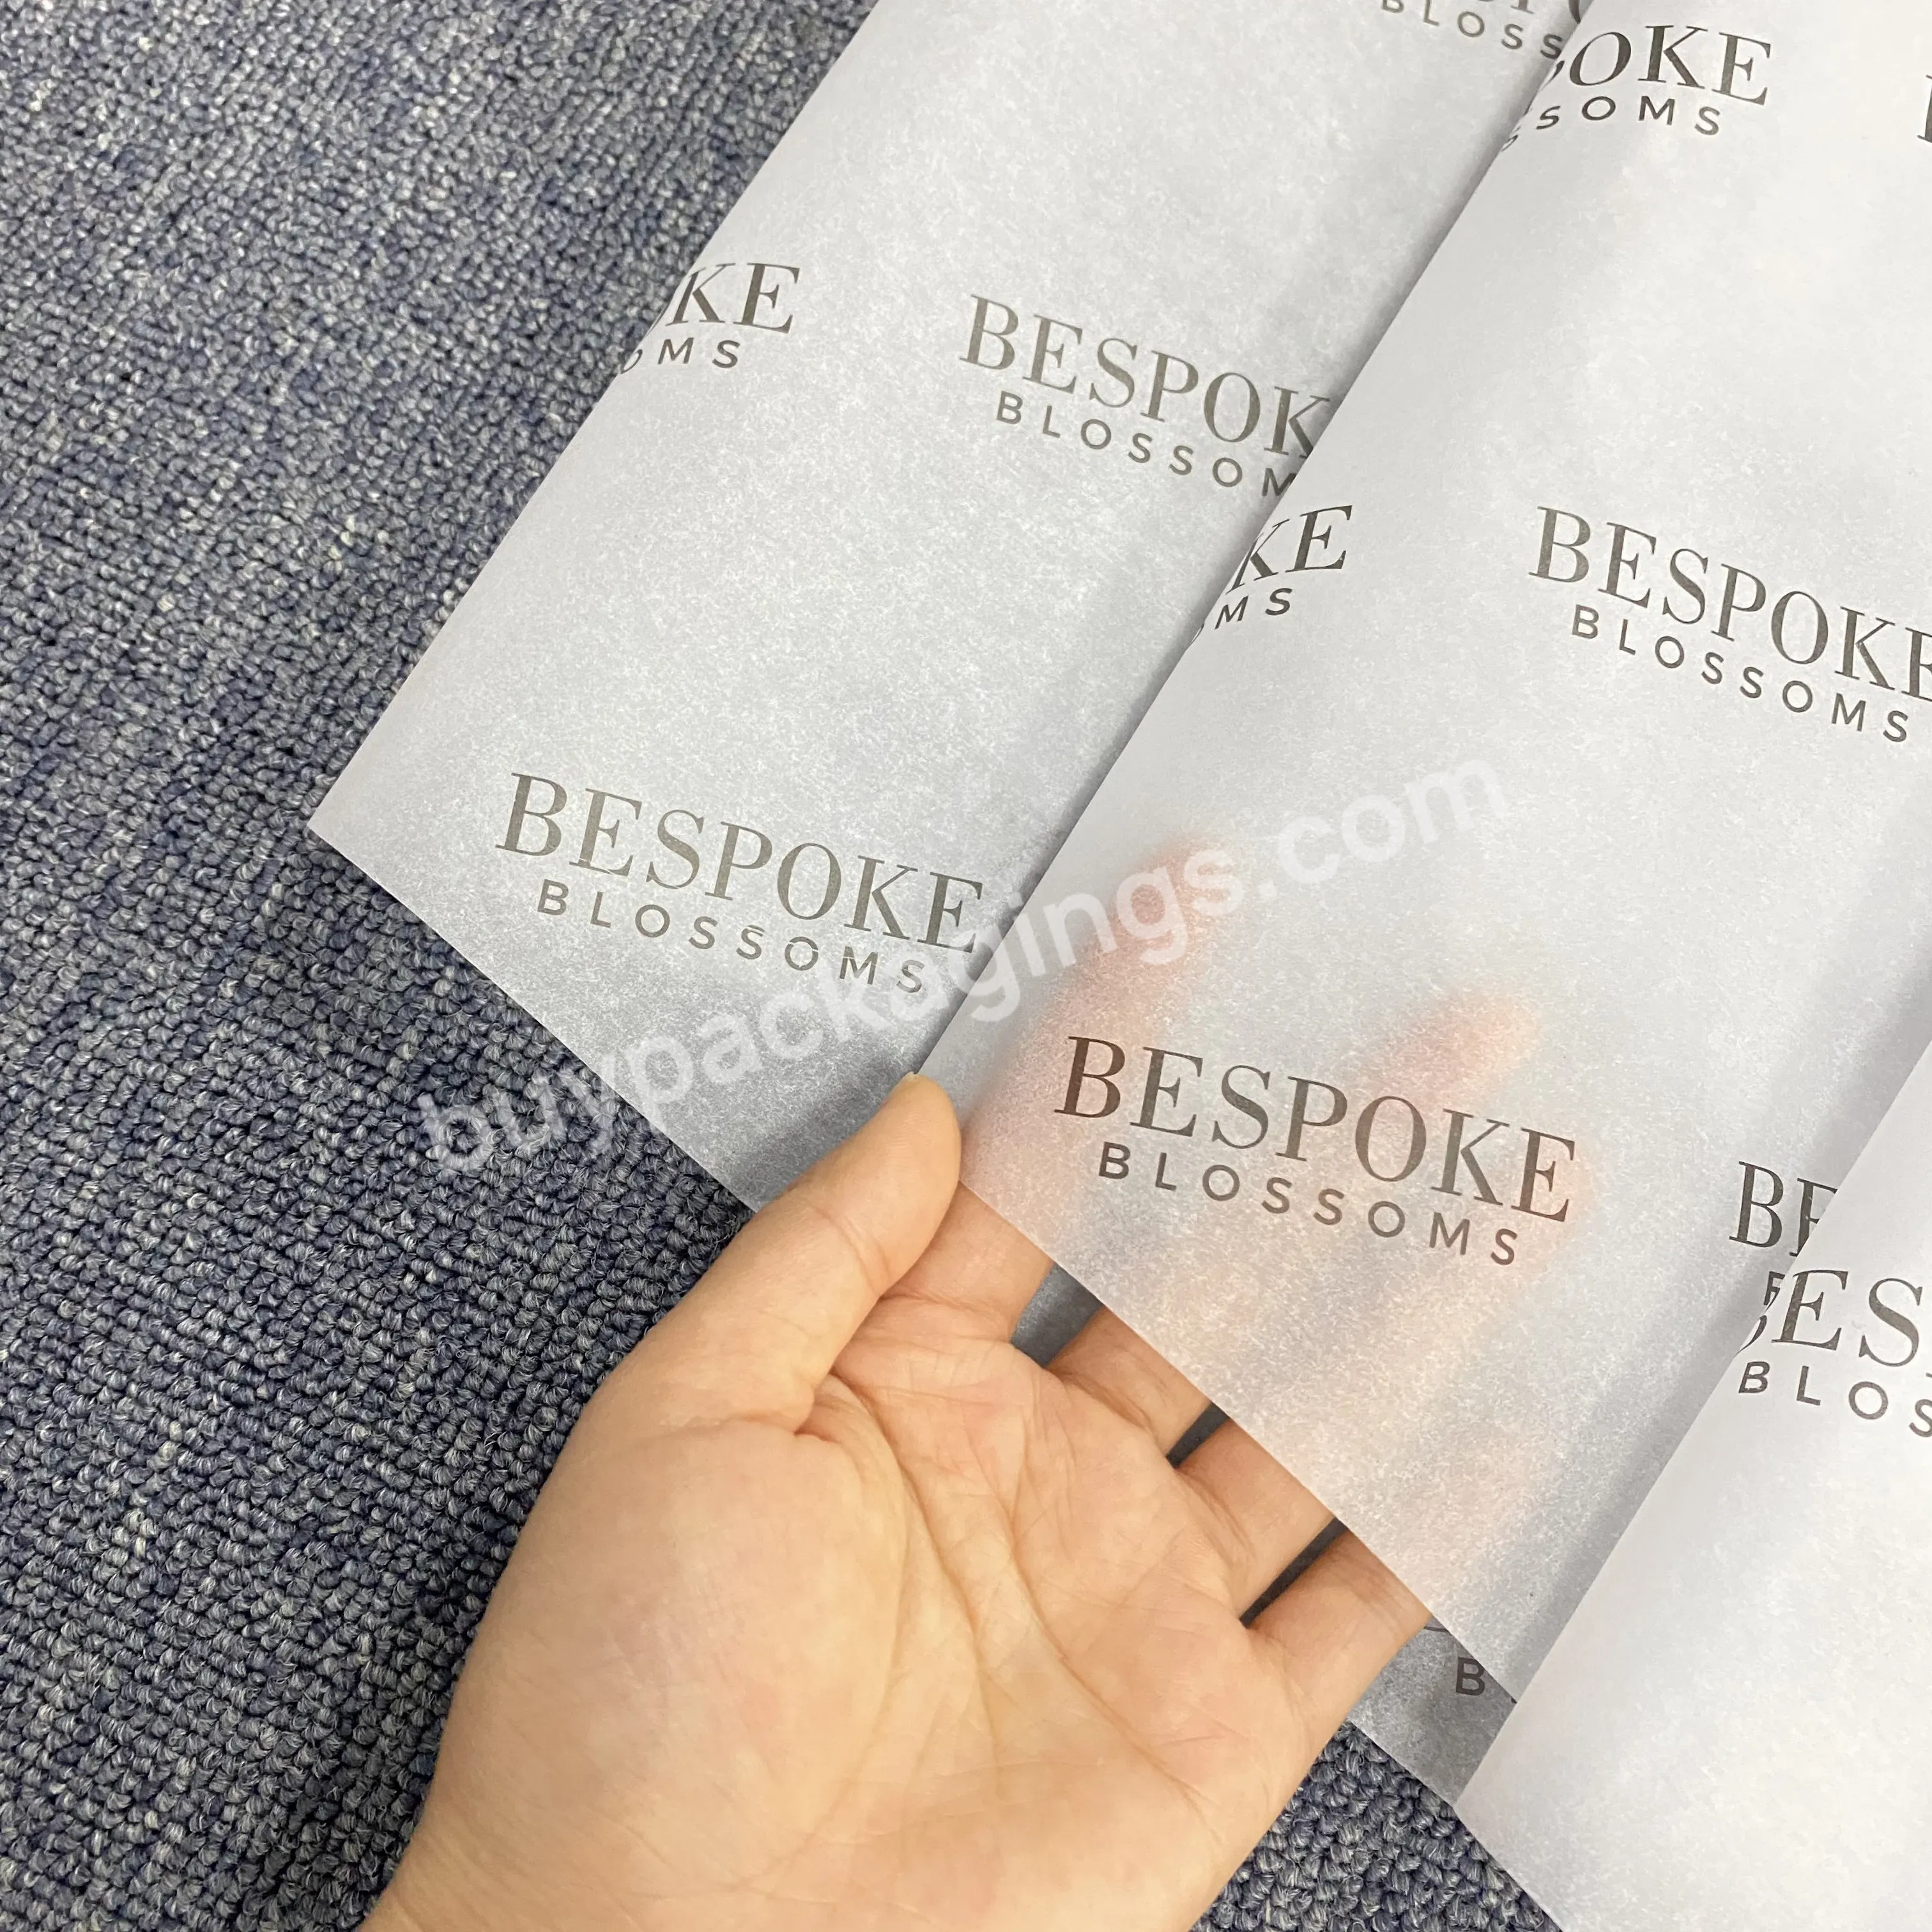 High Quality Low Moq Fashionable Design 50*70cm Wrapping Tissue Paper Customize Any Size Logo Print Recyclable Flower Tissue - Buy Fashionable Design 50*70cm Wrapping Tissue Paper,Customize Any Size Logo Print,Recyclable Flower Tissue.